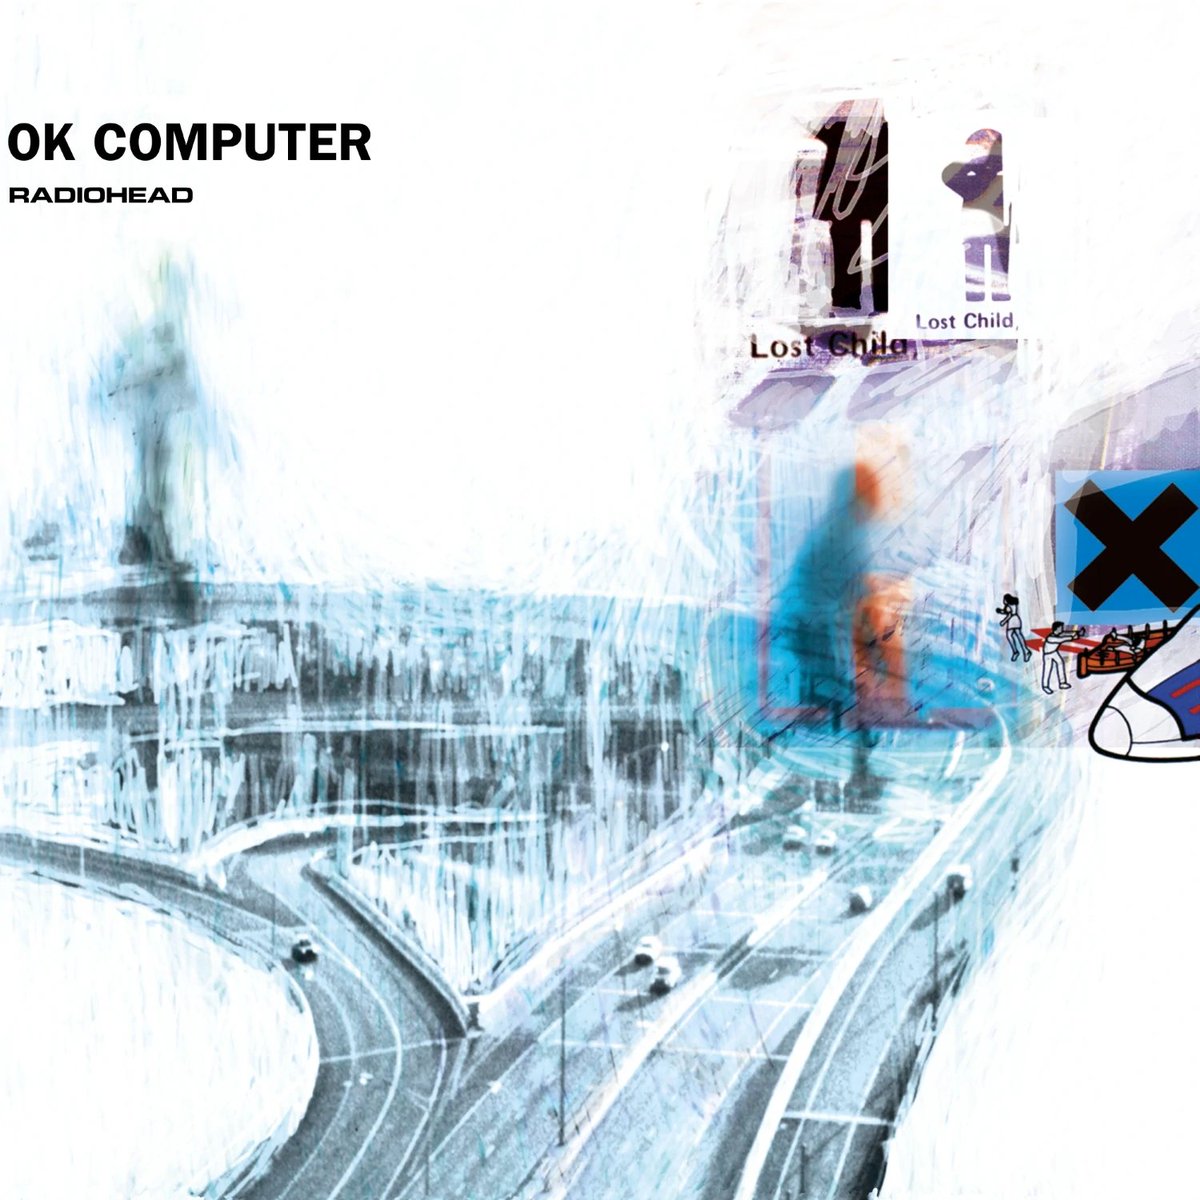 She turned 15 in 1999, when the latest Radiohead album was OK Computer.